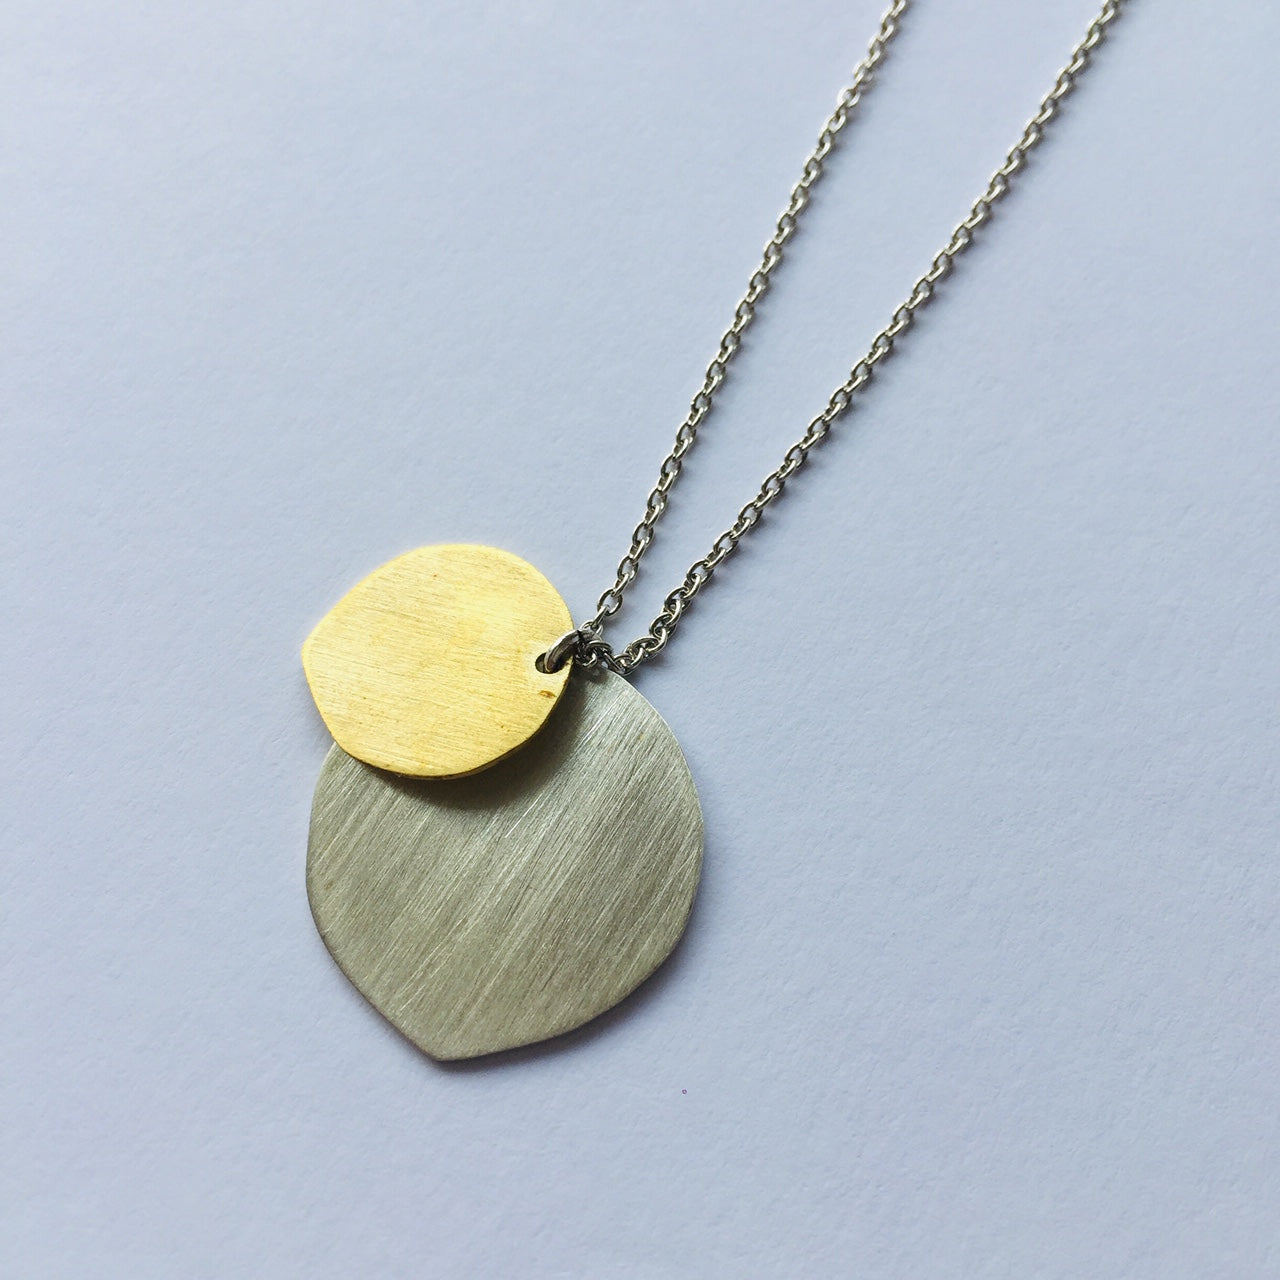 Unique Medallion / Round Combination Silver & Brass Pendant with Silver Chain Necklace コンビネーション・重ね付け・シルバー・真鍮・コインモチーフ・ネックレス・ペンダント